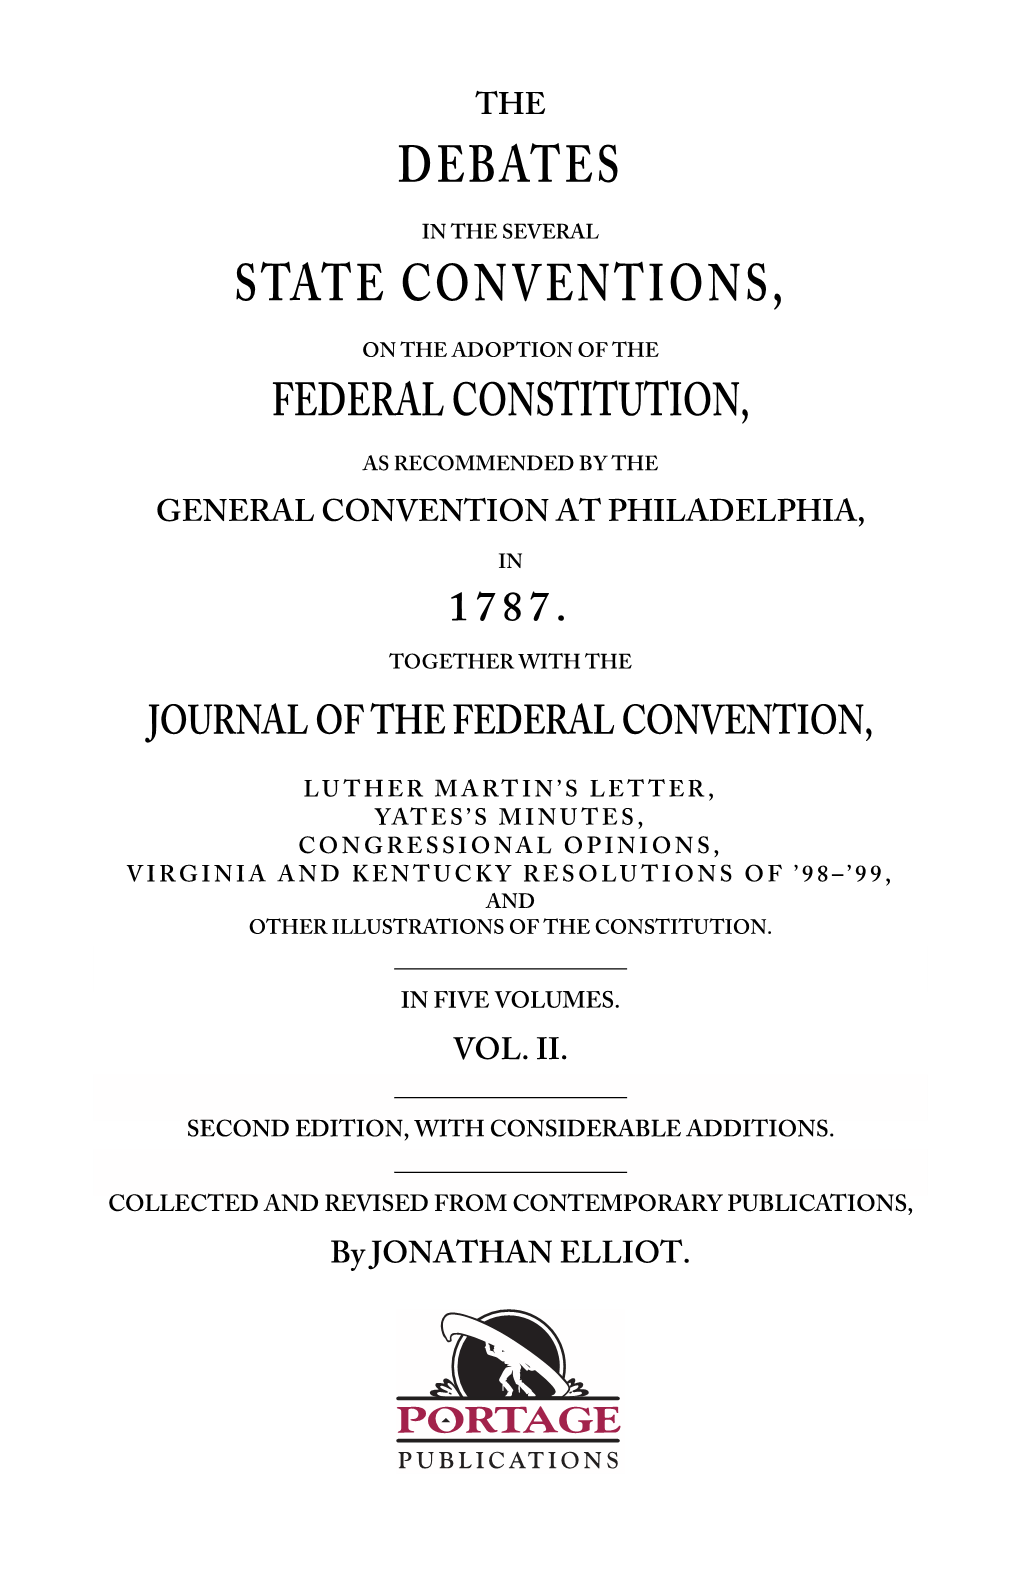 Debates in the Several State Conventions, Vol. 2